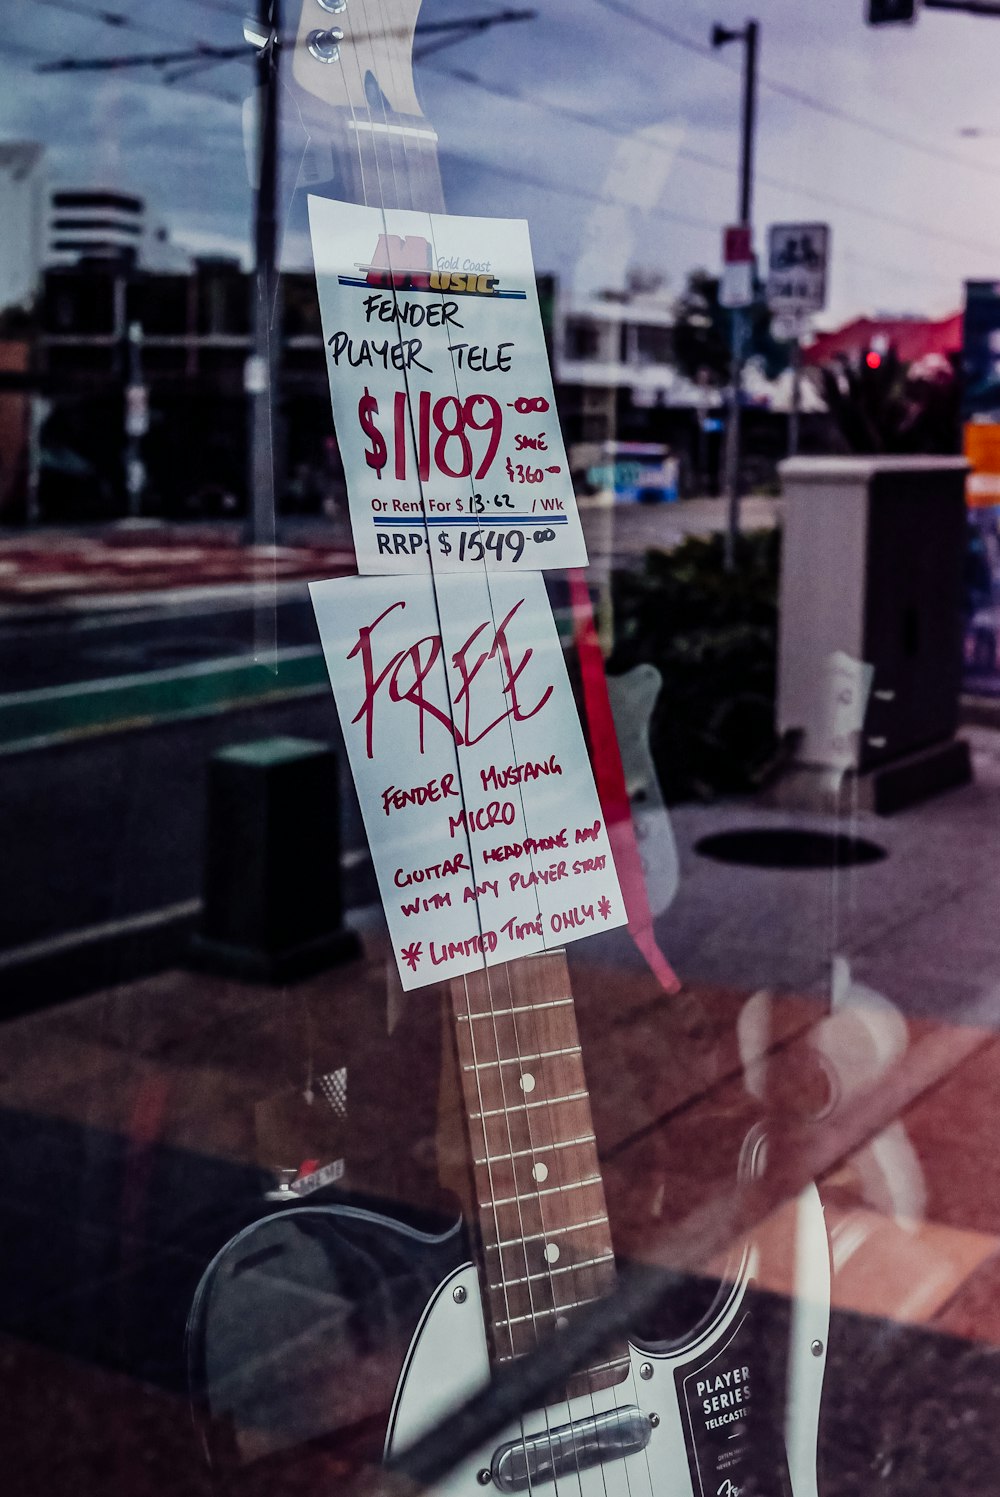 a guitar is for sale in a store window